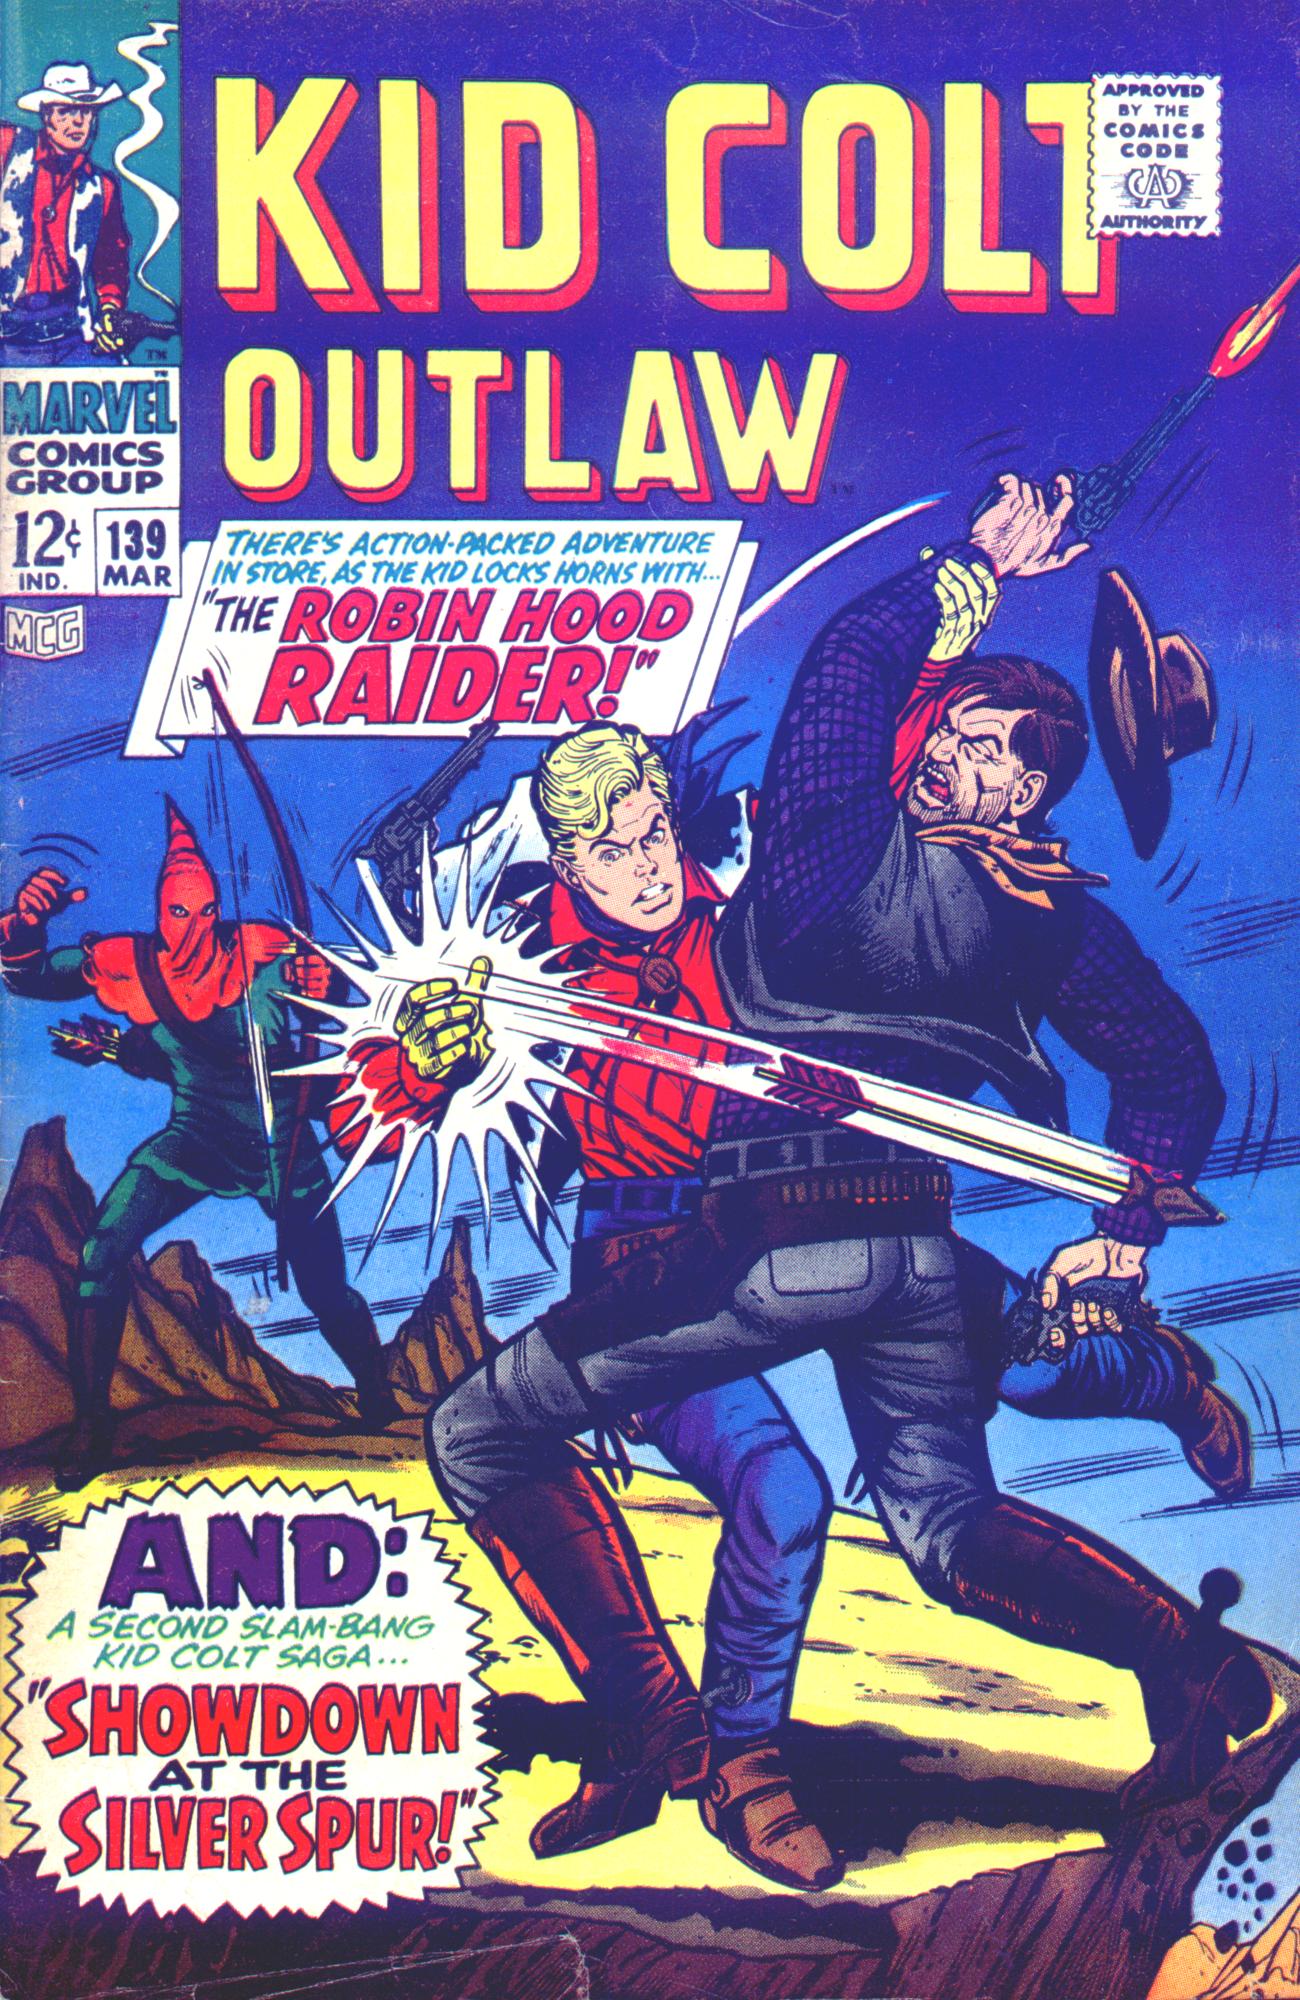 Read online Kid Colt Outlaw comic -  Issue #139 - 1